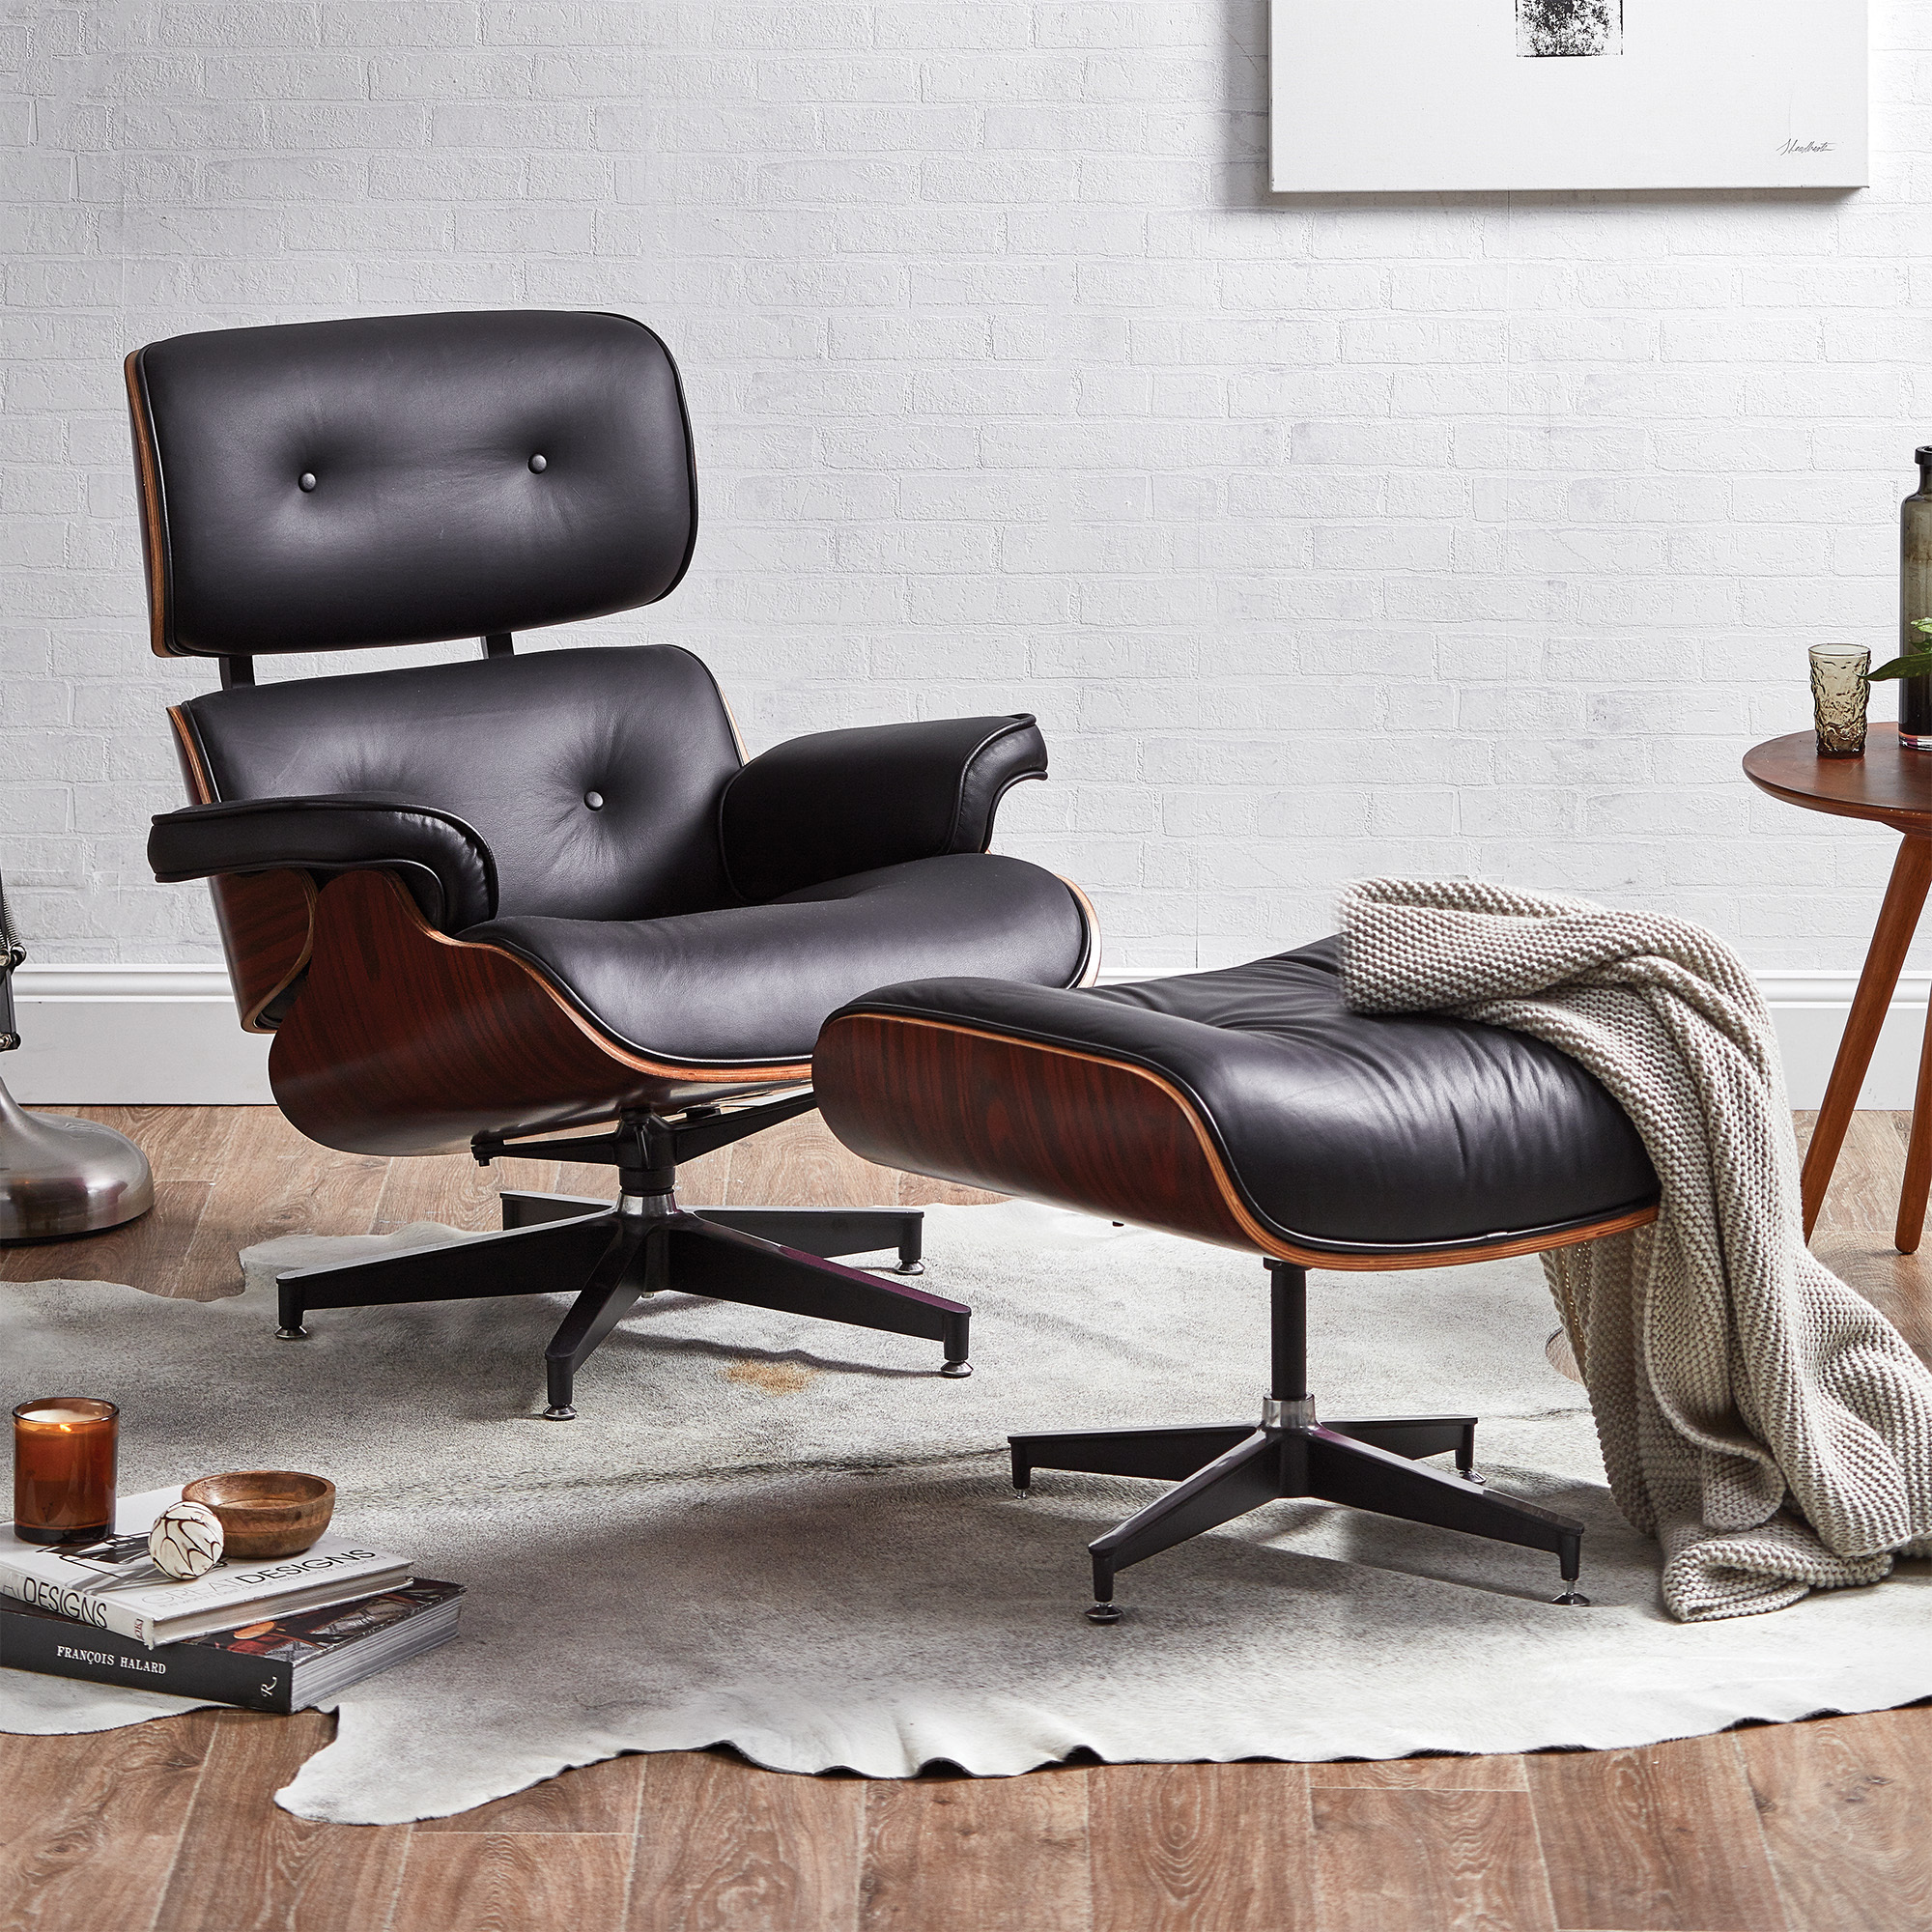 Eames Replica Leather Lounge Chair, Eames Leather Lounge Chair